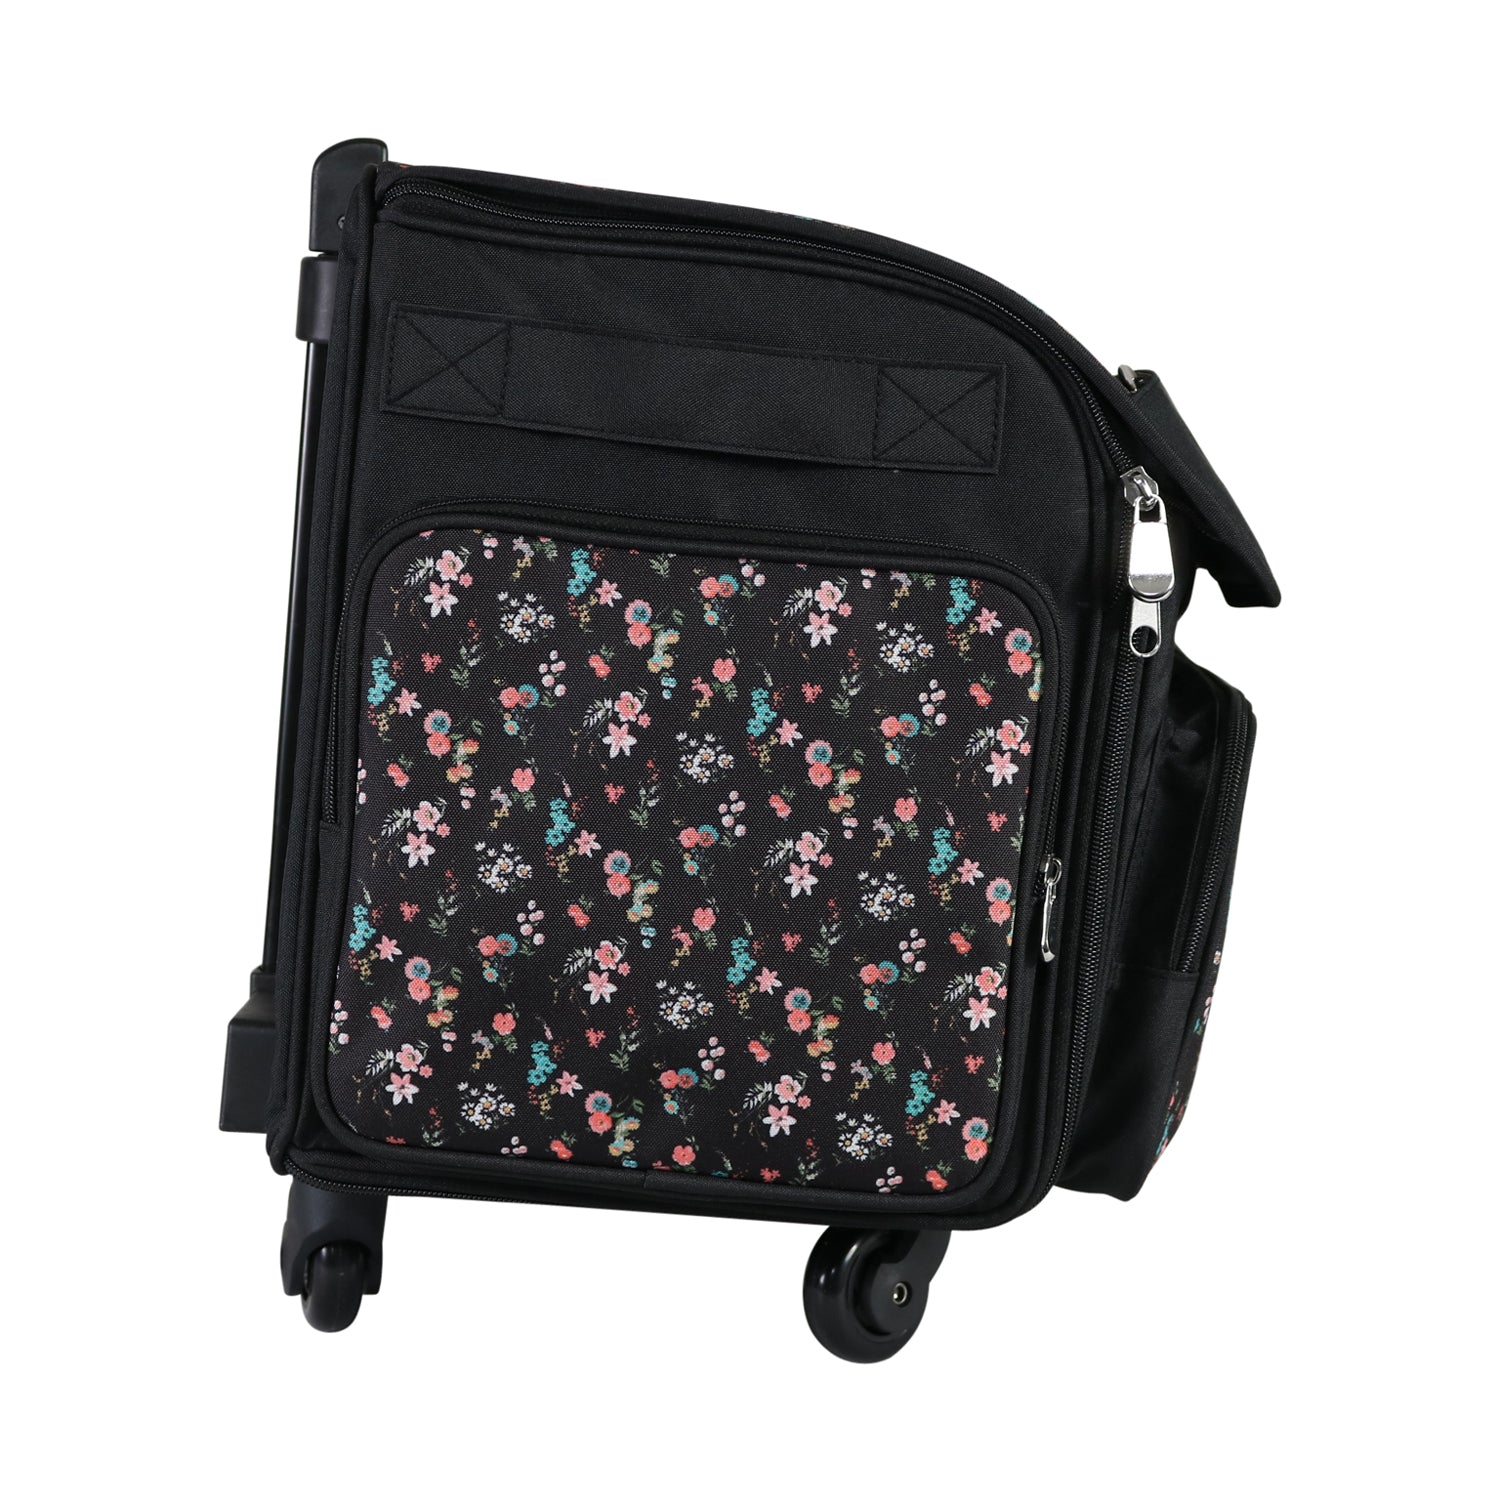  Everything Mary 4 Wheel Collapsible Deluxe Sewing Machine  Storage Case, Pink & Grey Floral - Rolling Trolley Carrying Bag Compatible  with Brother, Singer, and Most Machines